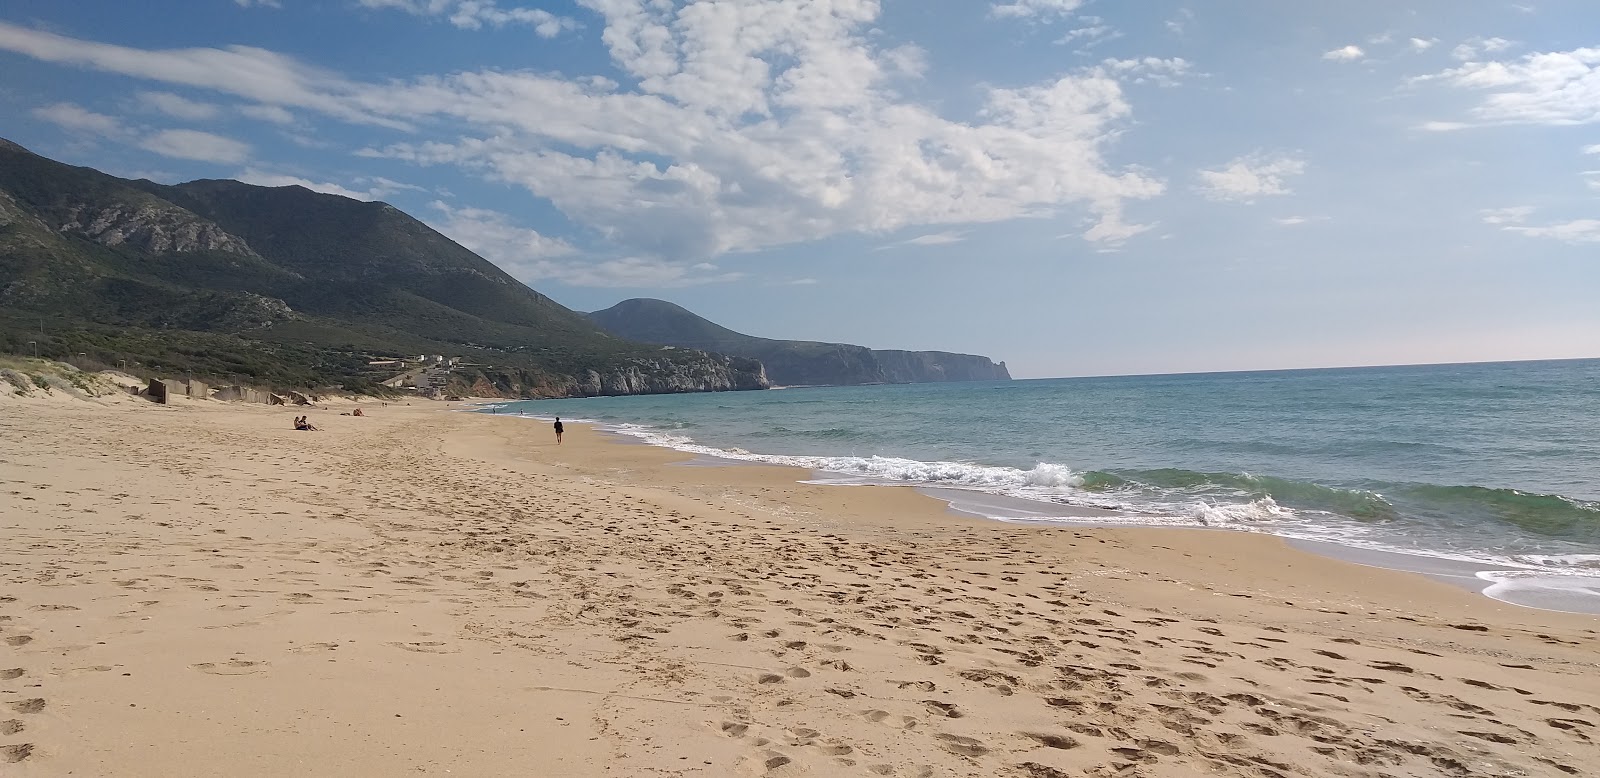 Photo of Piccoli Pini beach - popular place among relax connoisseurs